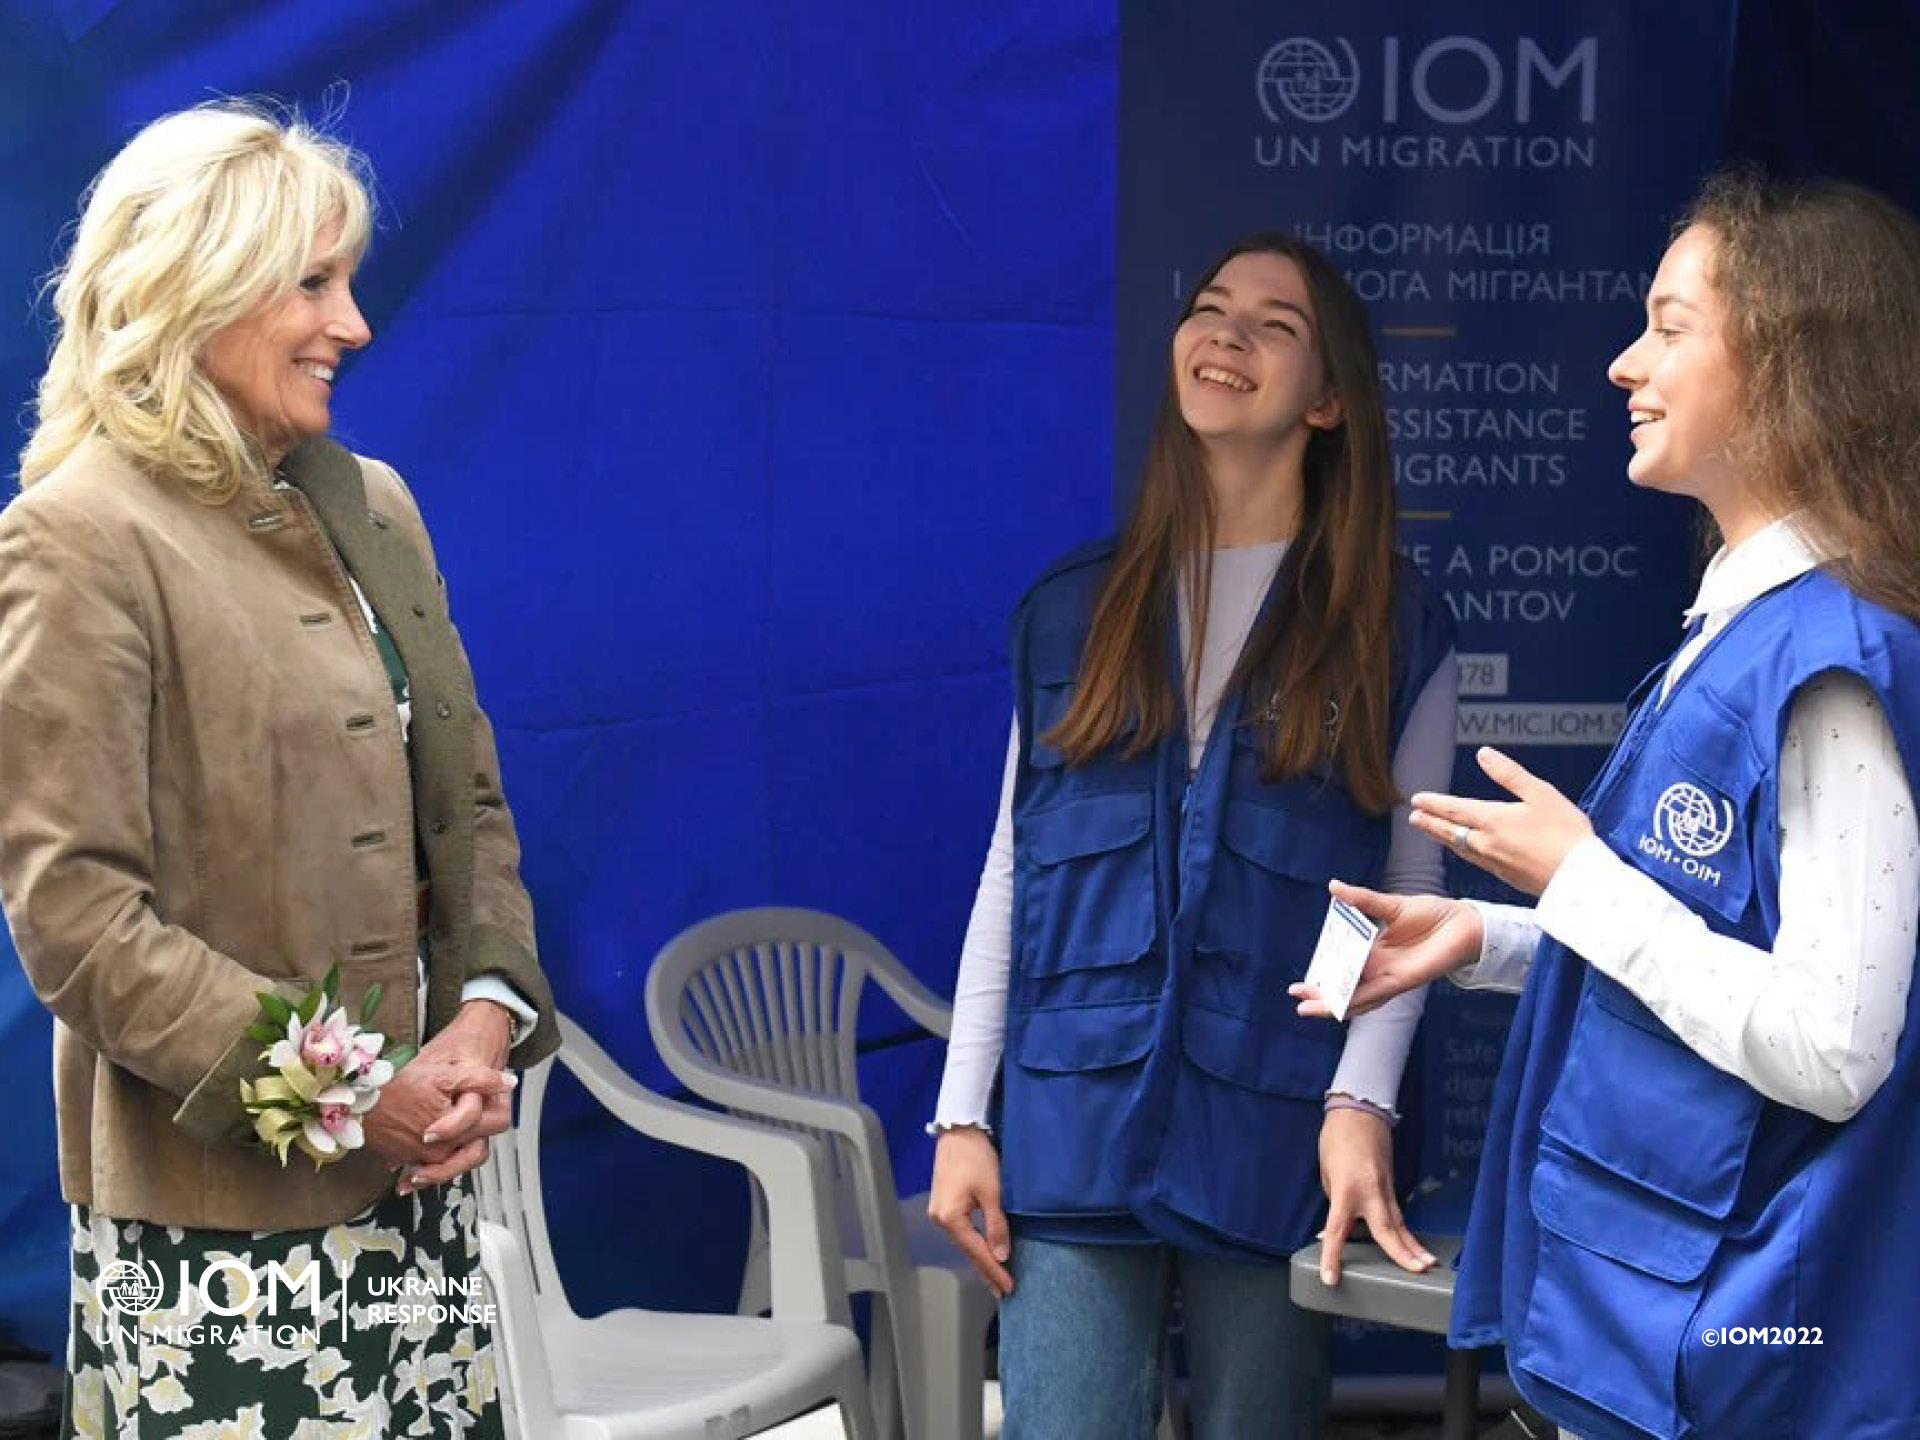 Dr. Jill Biden with IOM consultants at the IOM infopoint in Kosice hotspot. Photo © International Organization for Migration (IOM) 2022.